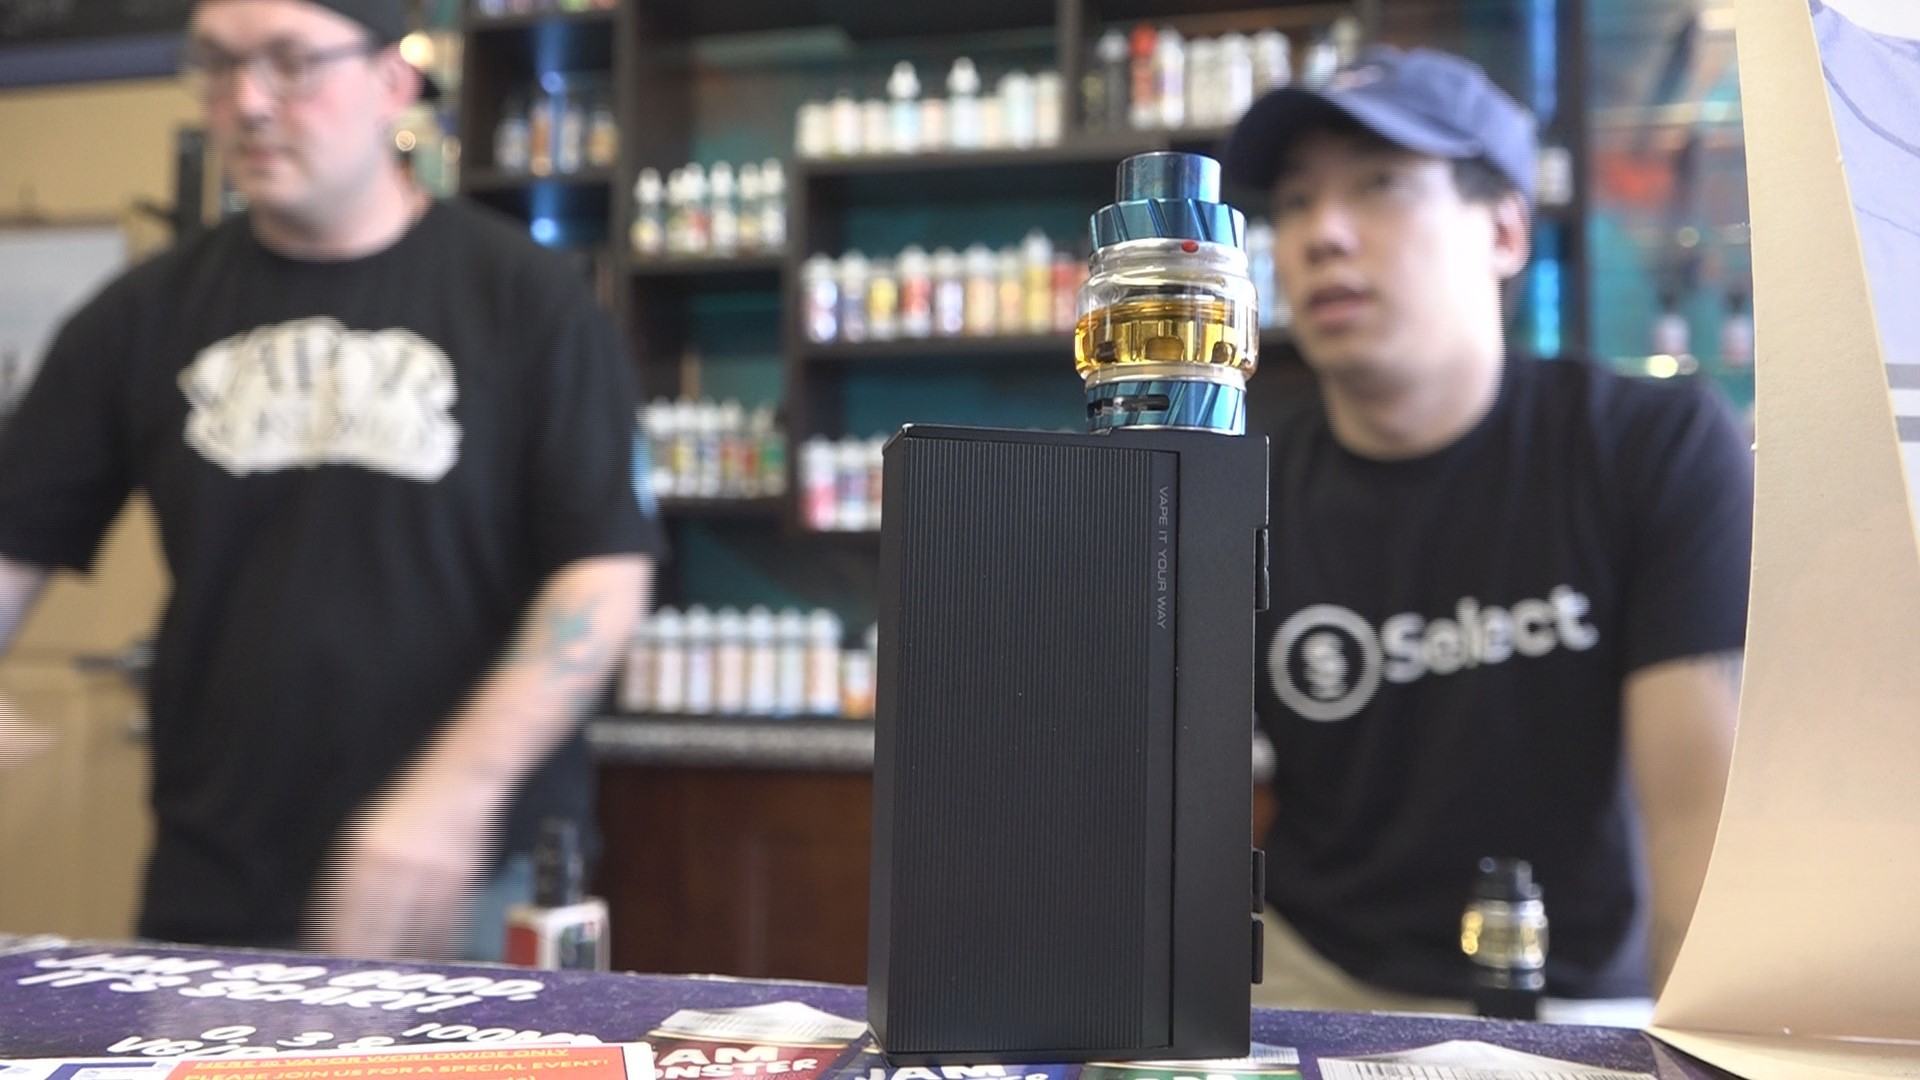 A bill introduced in the Montgomery County Council Tuesday would ban vape shops from operating within a half mile of any middle school or high school.